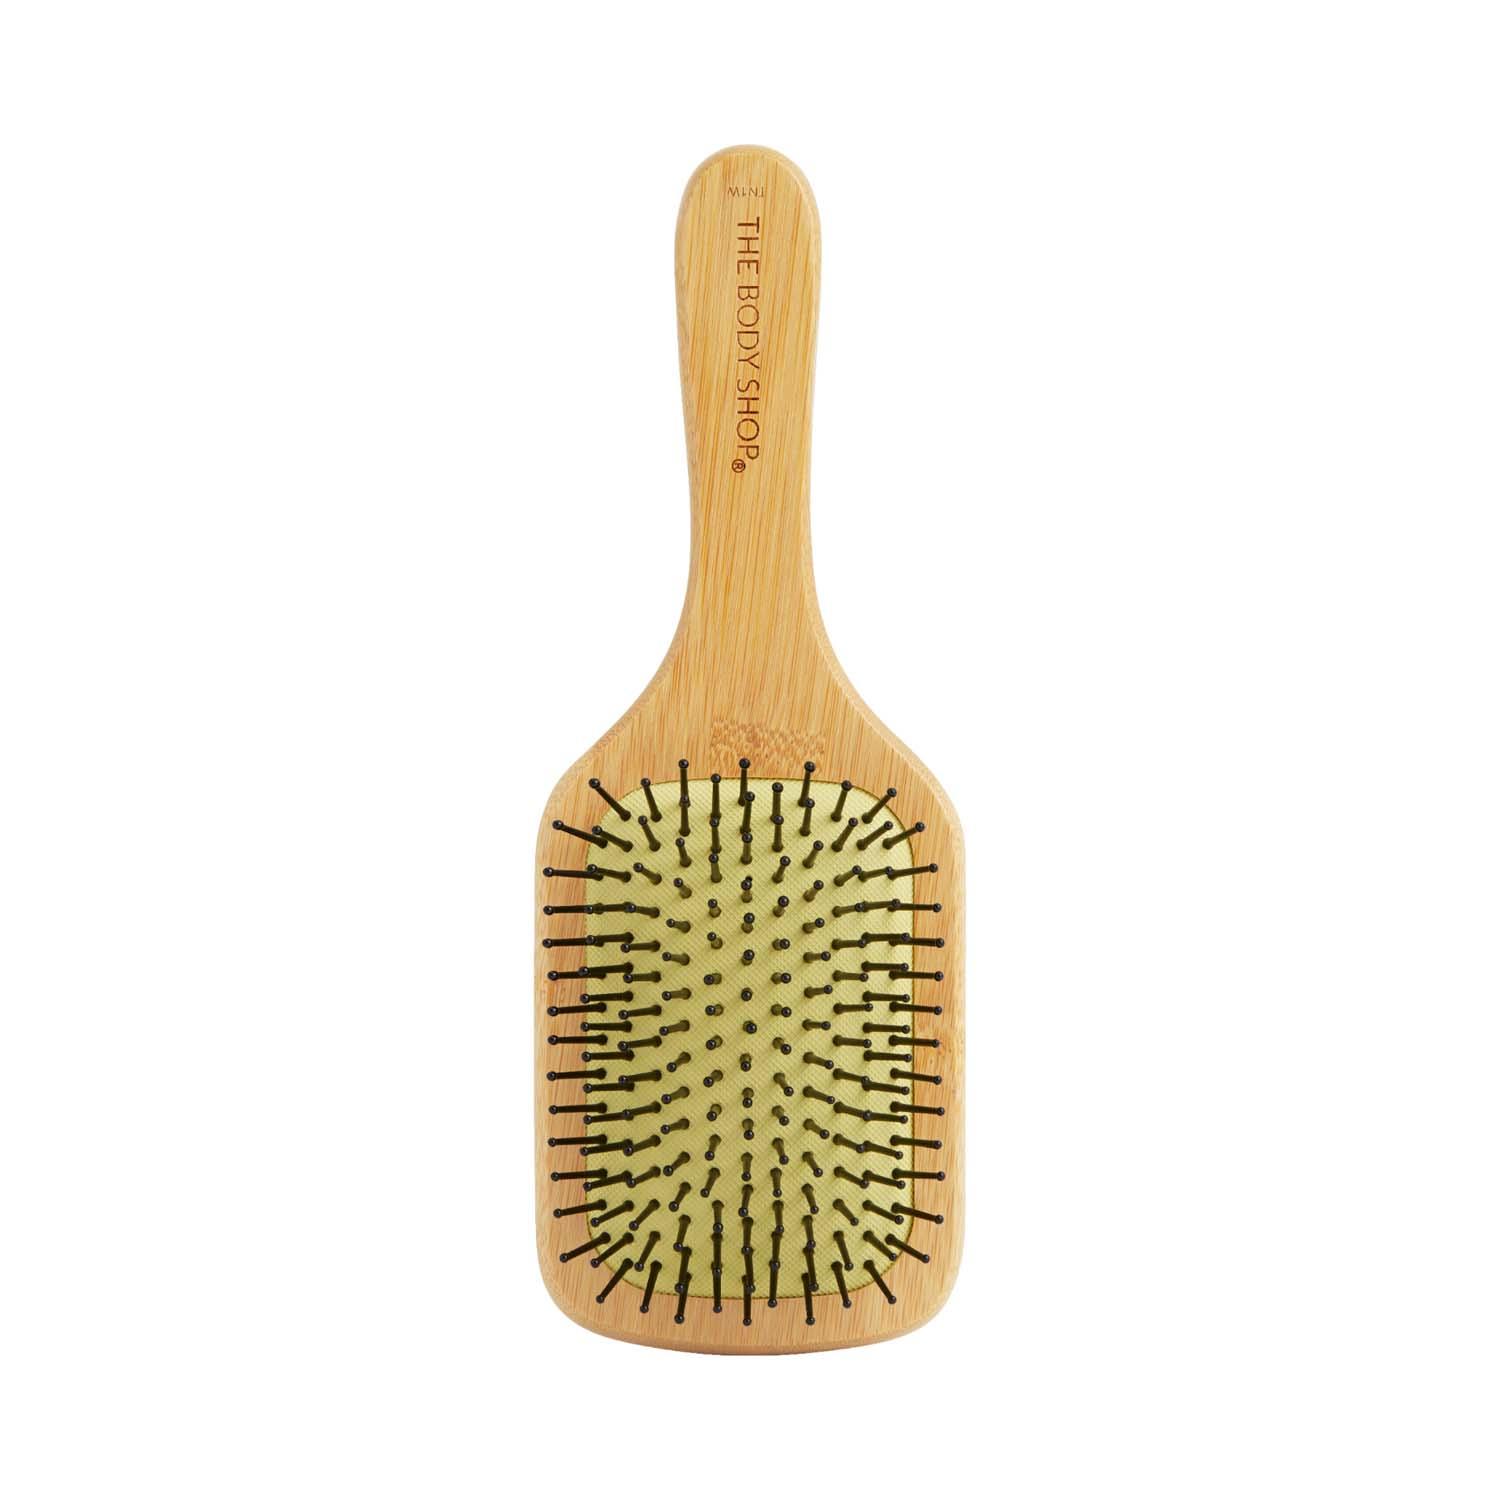 The Body Shop | The Body Shop Paddle Hair Brush